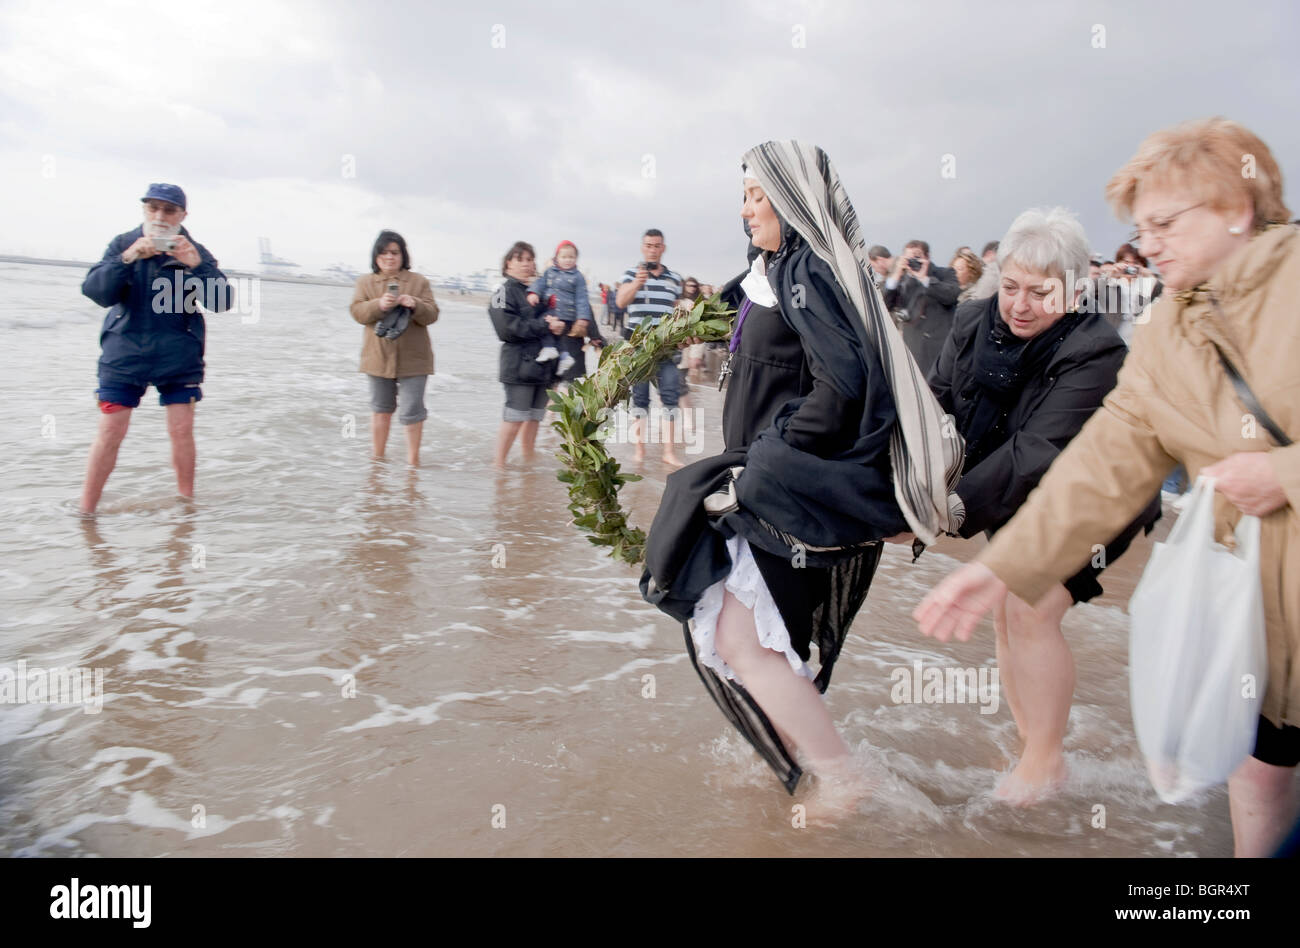 Virgin Mary throws a laurel crown in memory of her dead son, Jesus. Holy Easter celebration in El Cabanyal, Valencia, Spain Stock Photo